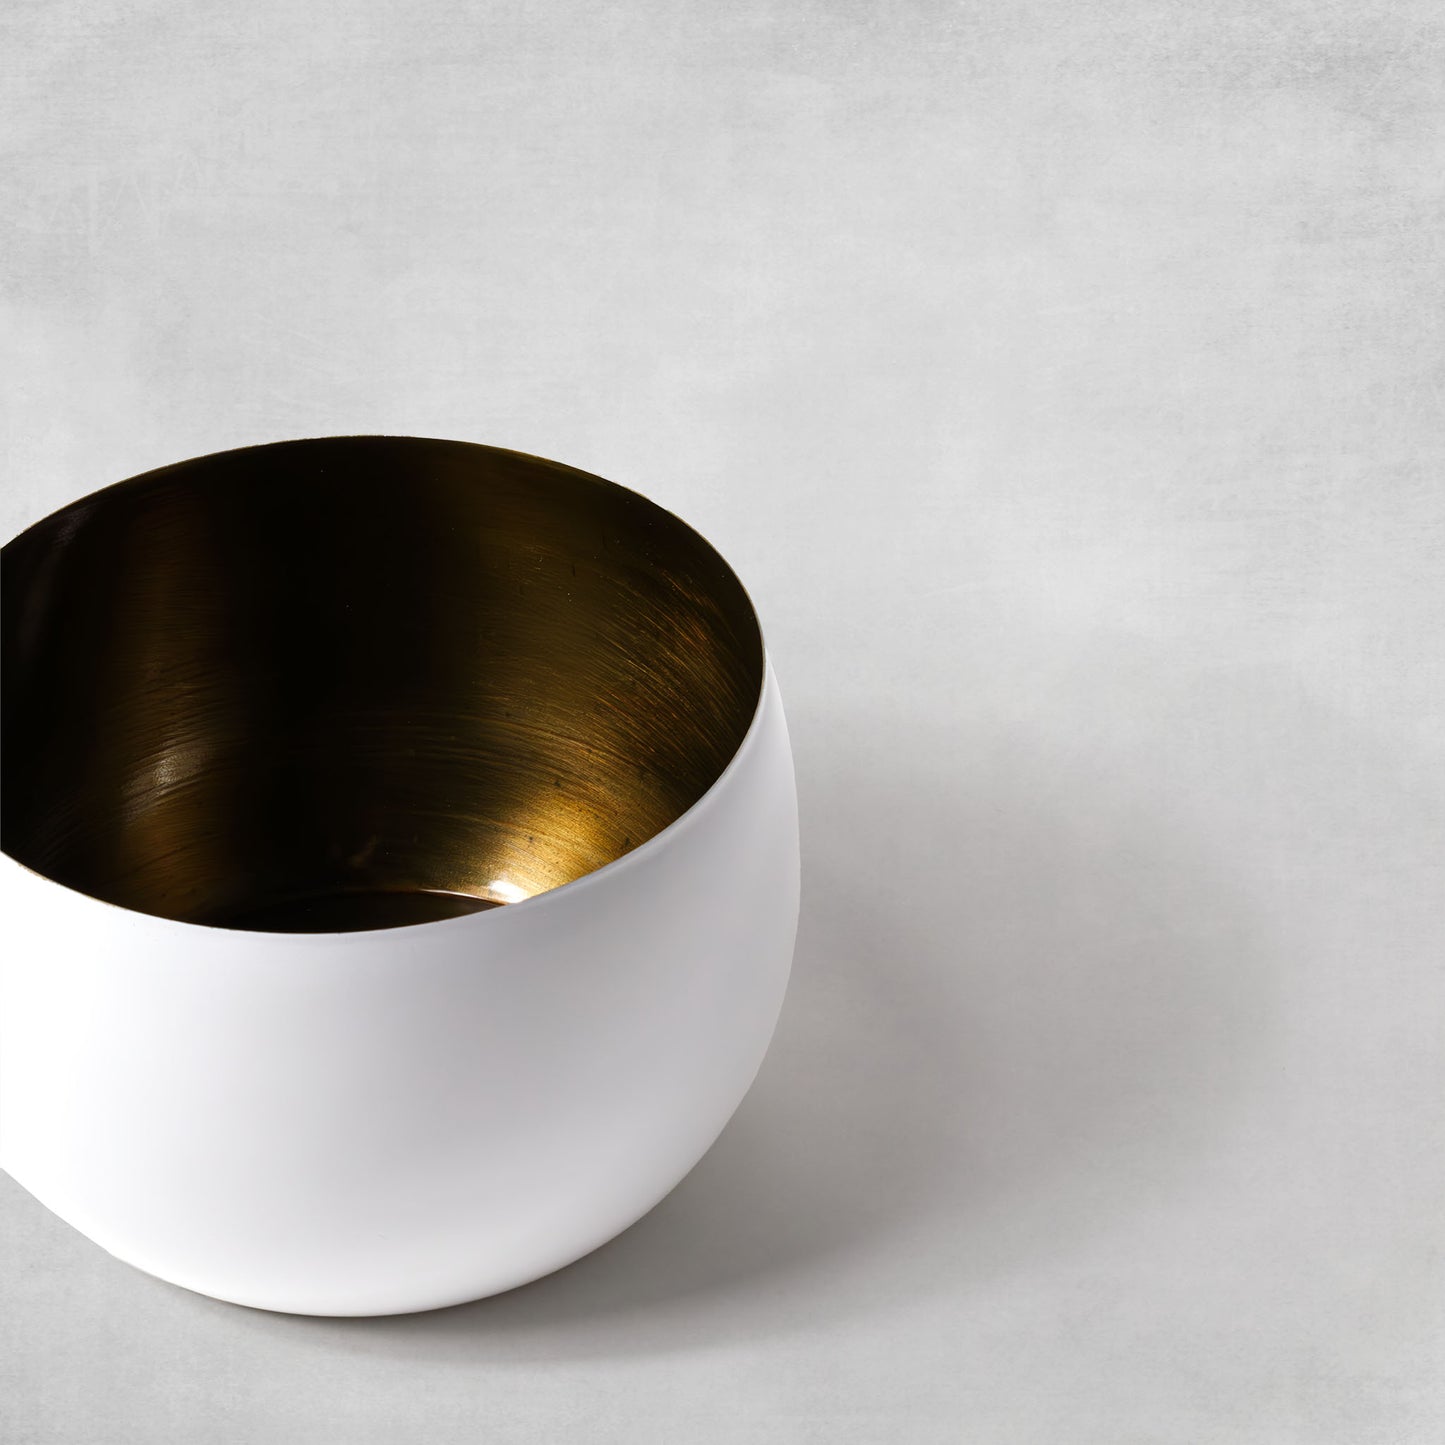 Decorative small white bowl with antique brass finish on gray background.